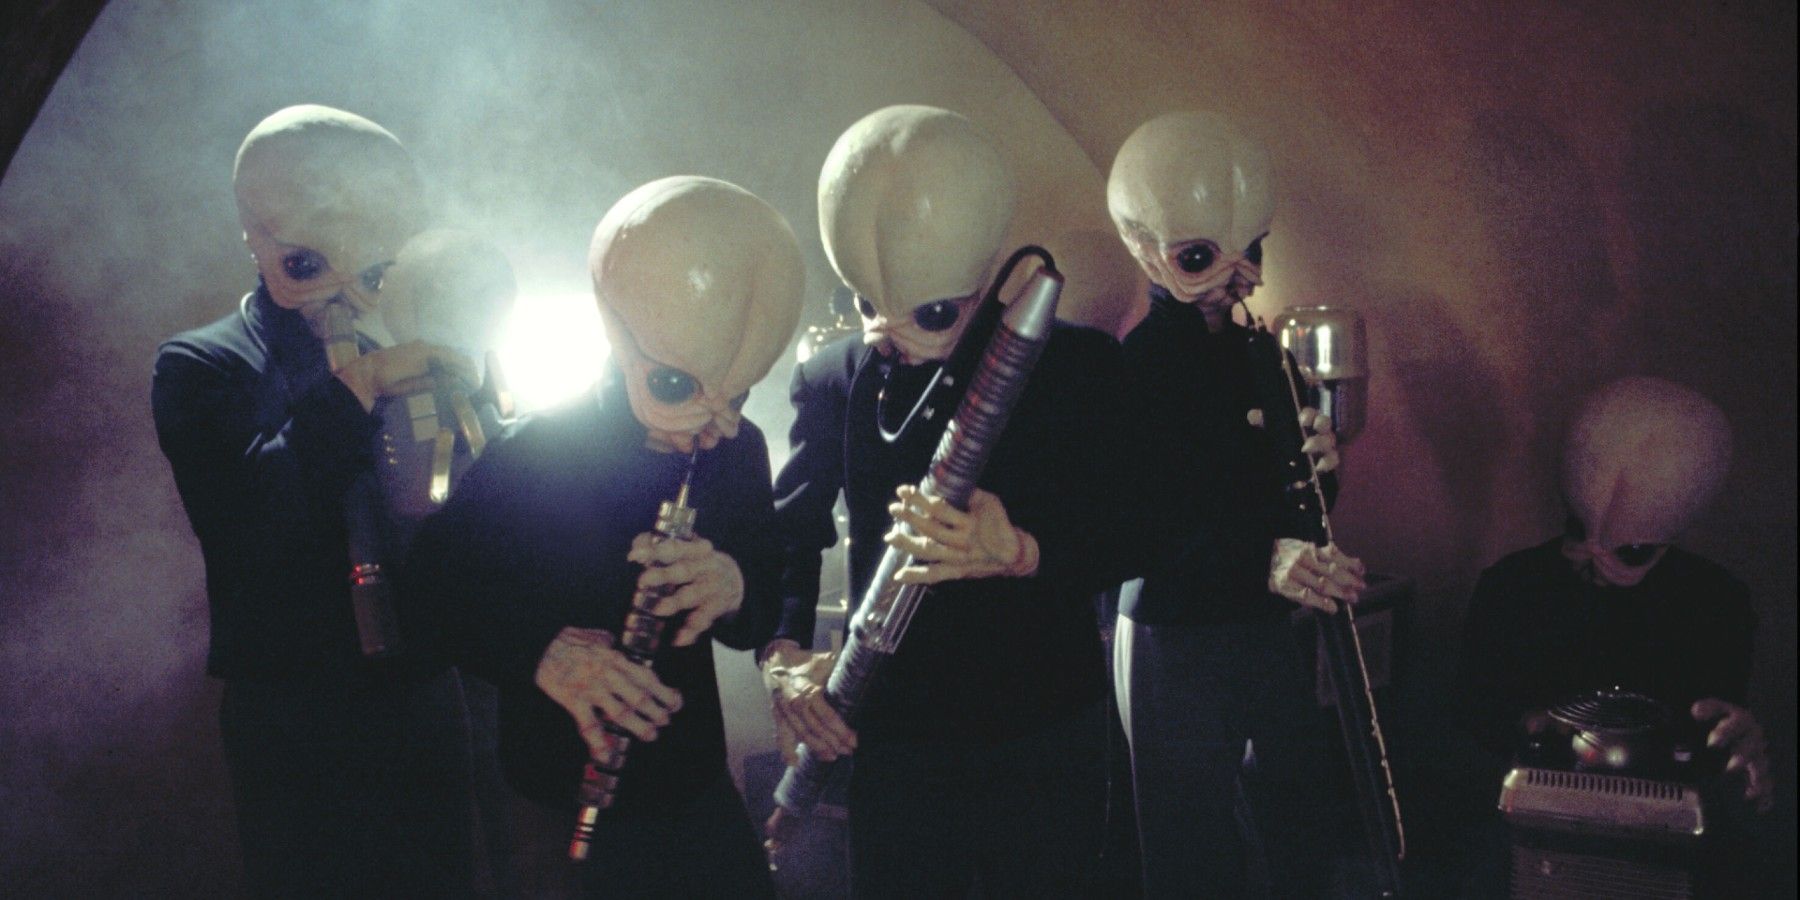 Star Wars cantina band episode IV A New Hope Figrin D'an and the Modal Nodes